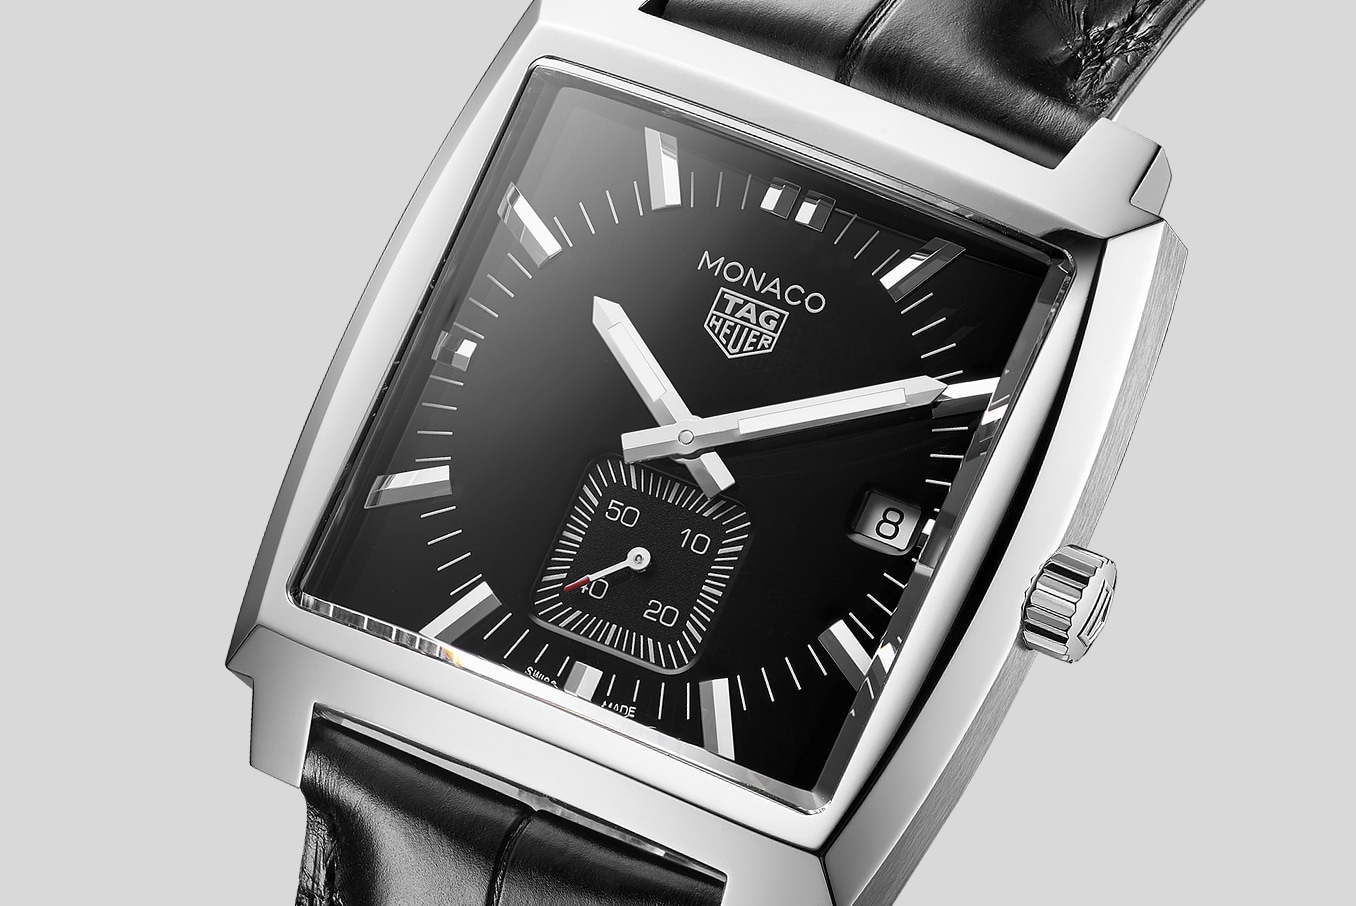 Tag Heuer Monaco from Wu : r/ChinaTime